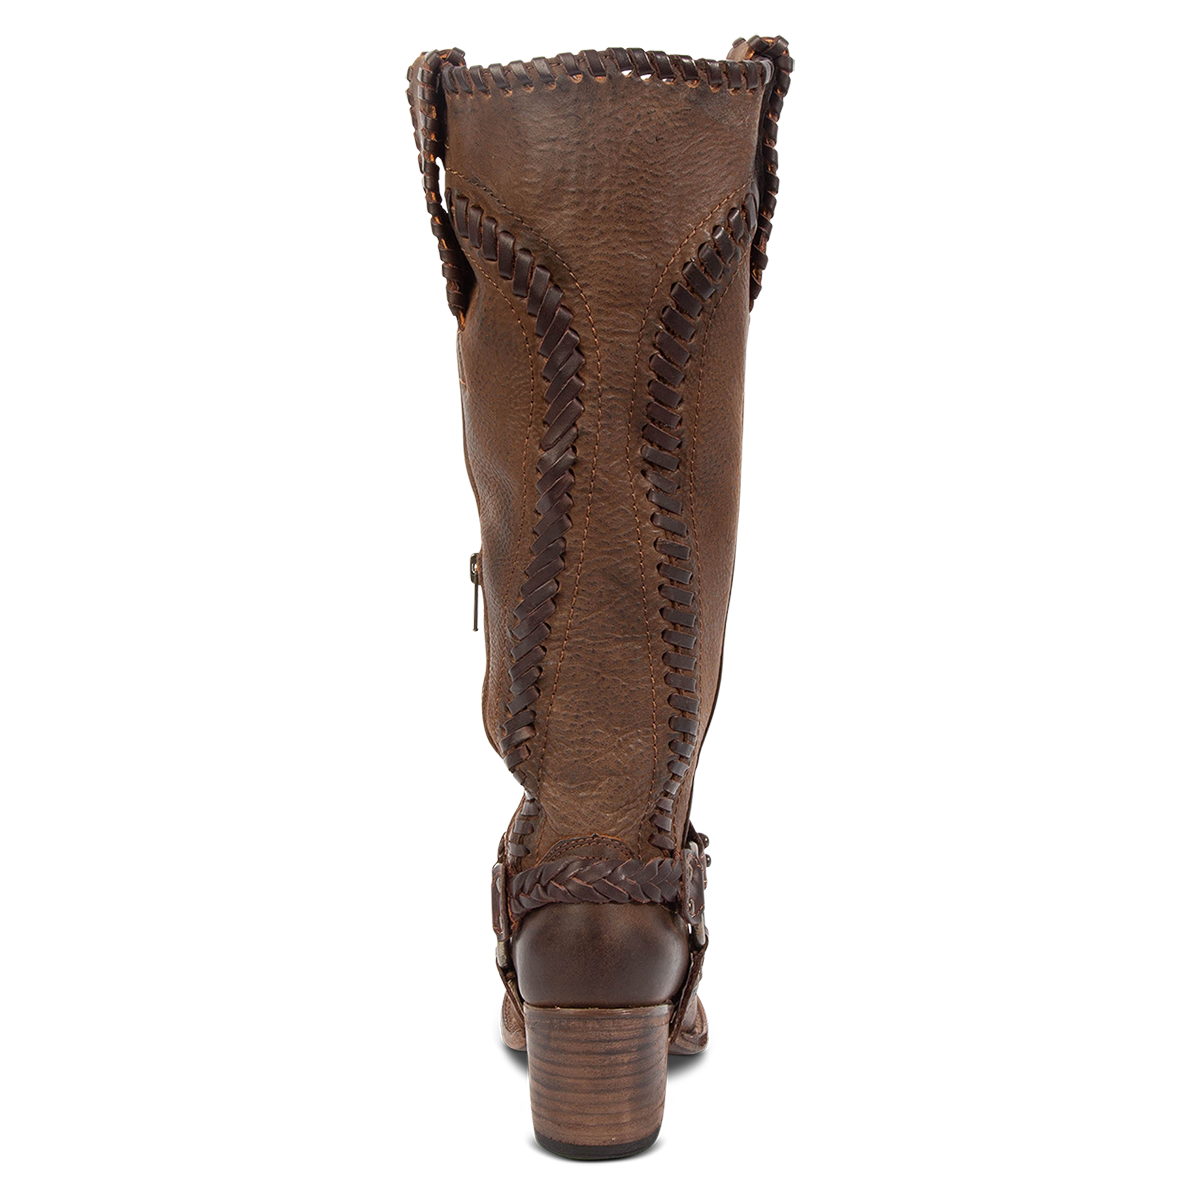 Back view showing whip stitch detailing, braided ankle harness and stacked heel on FREEBIRD women's Clover brown leather boot